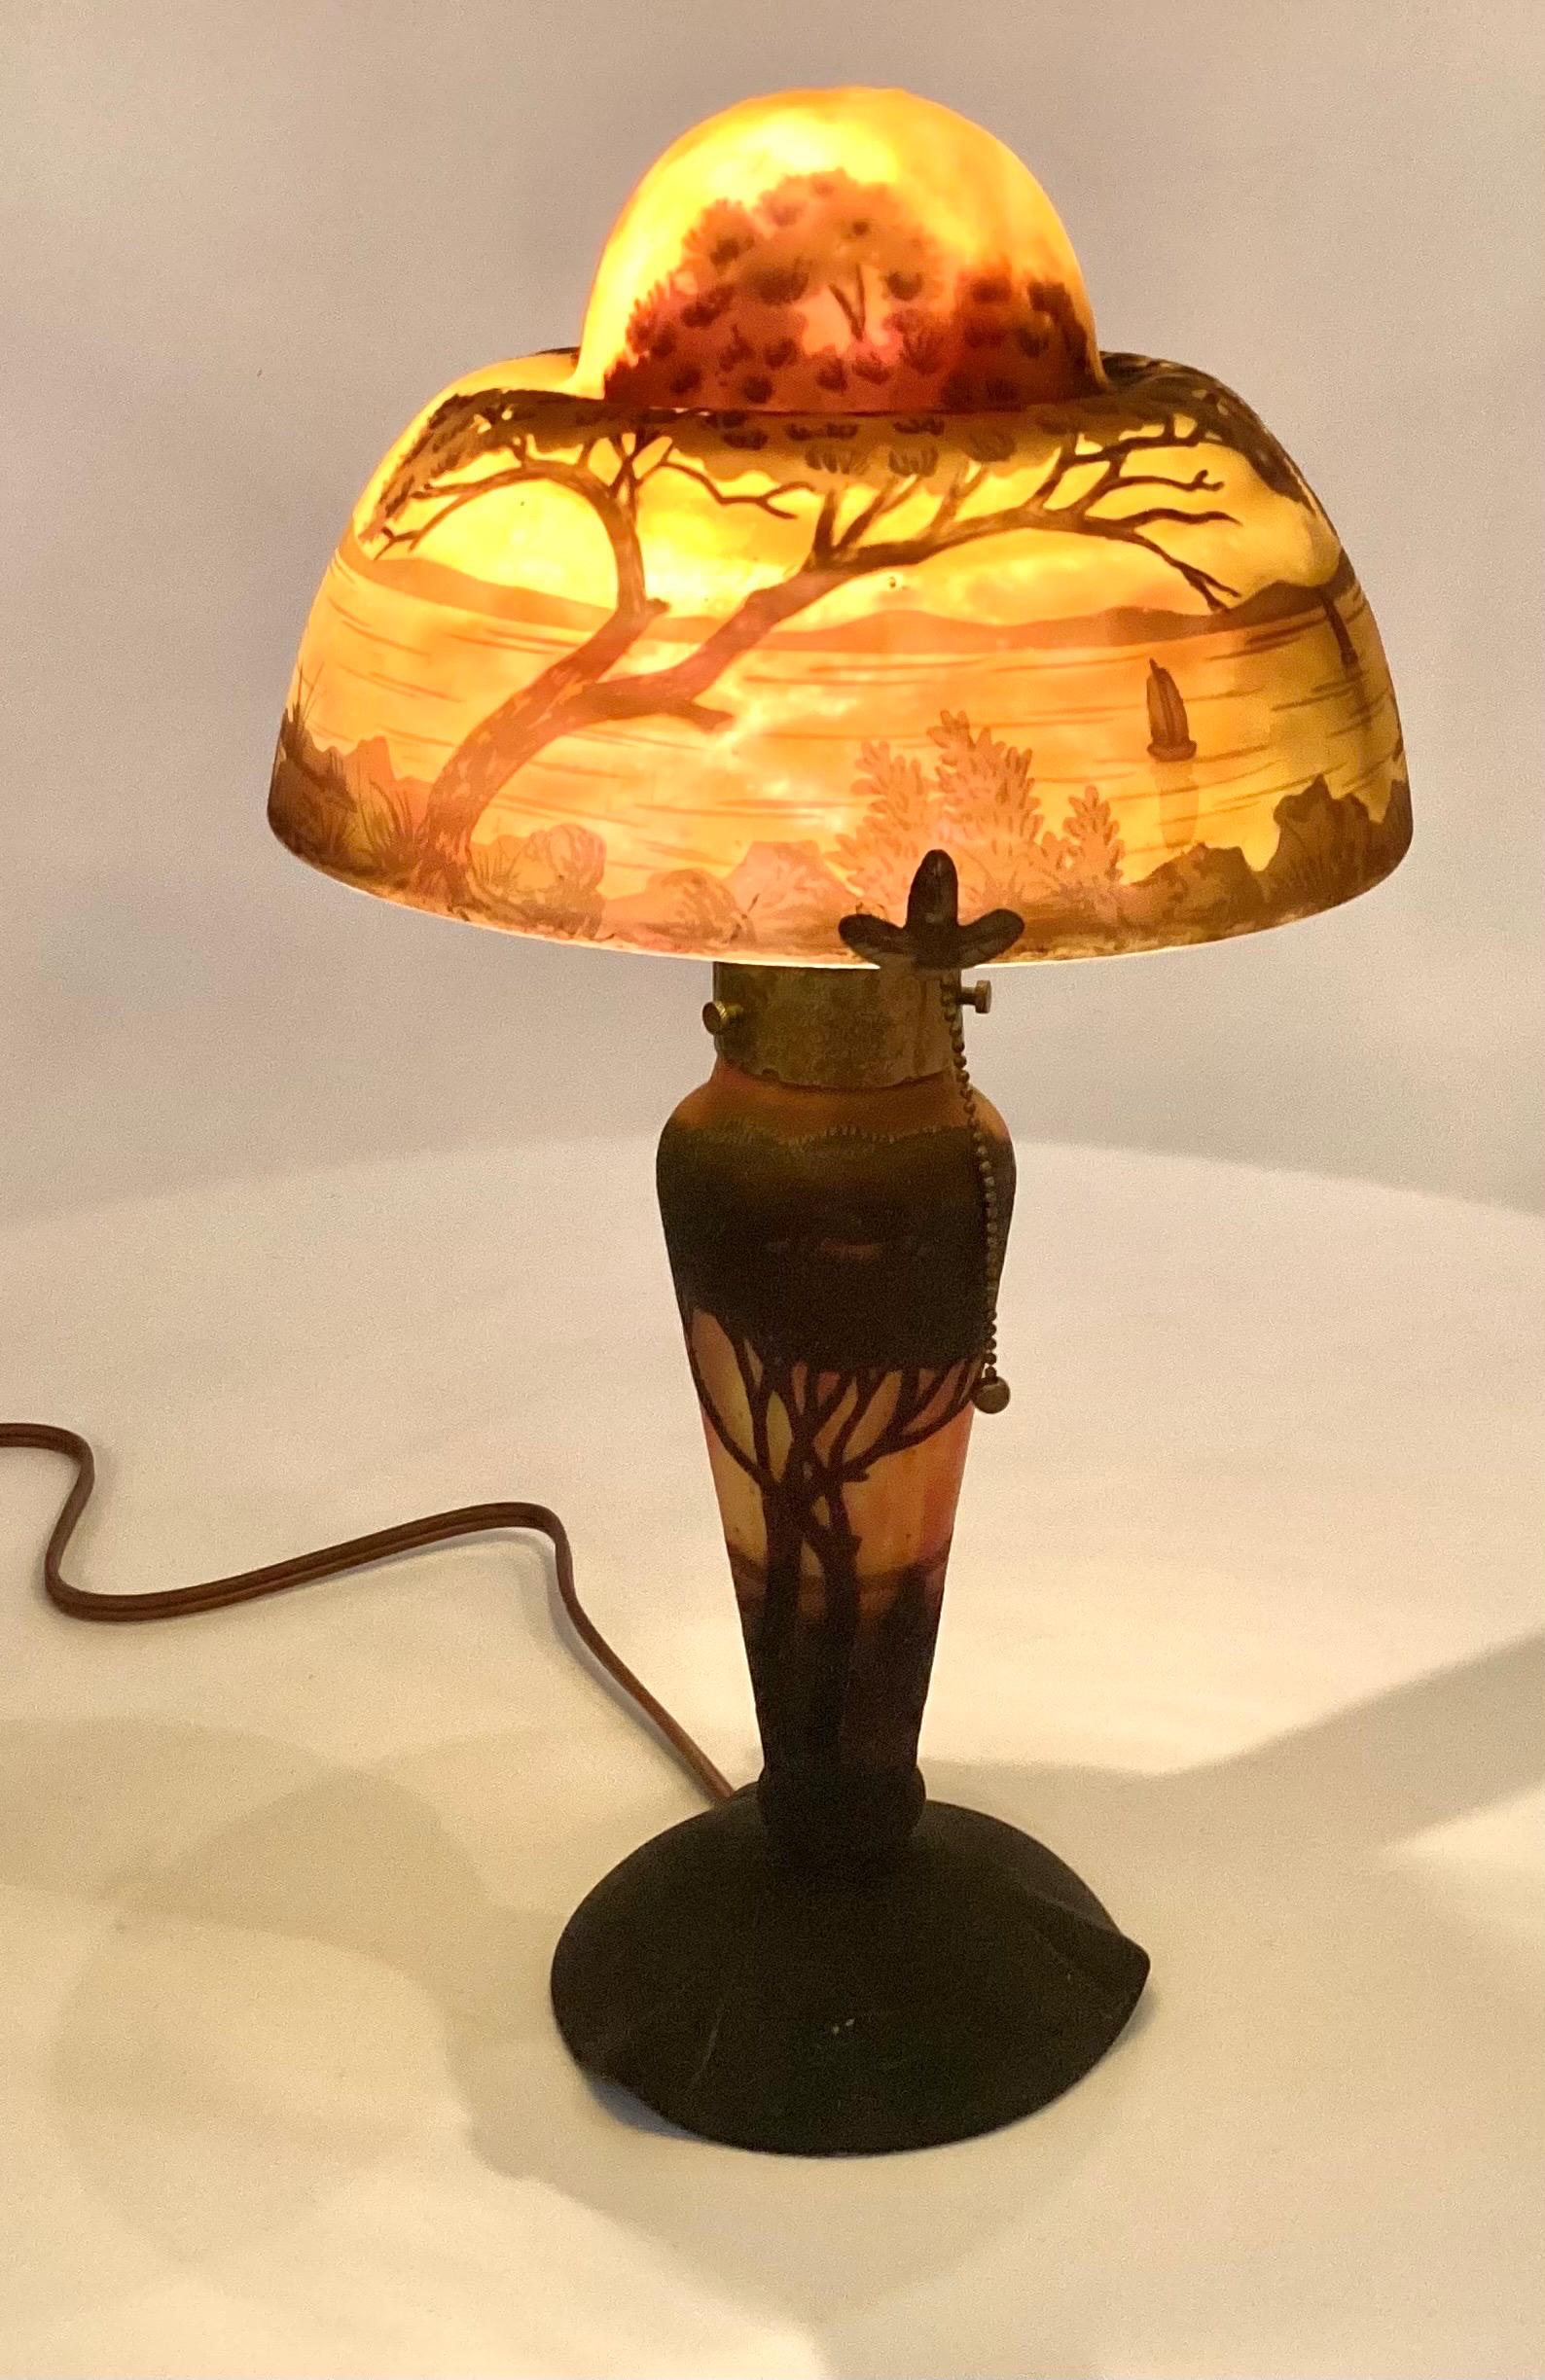 An original Daum Nancy table lamp in care colored cameo glass. The dark color overlay contrasts the orange on gold background. The shade is a tranquil lake scene with two large trees and 5 sailboats, the base depicting trees and shrubs. Each is